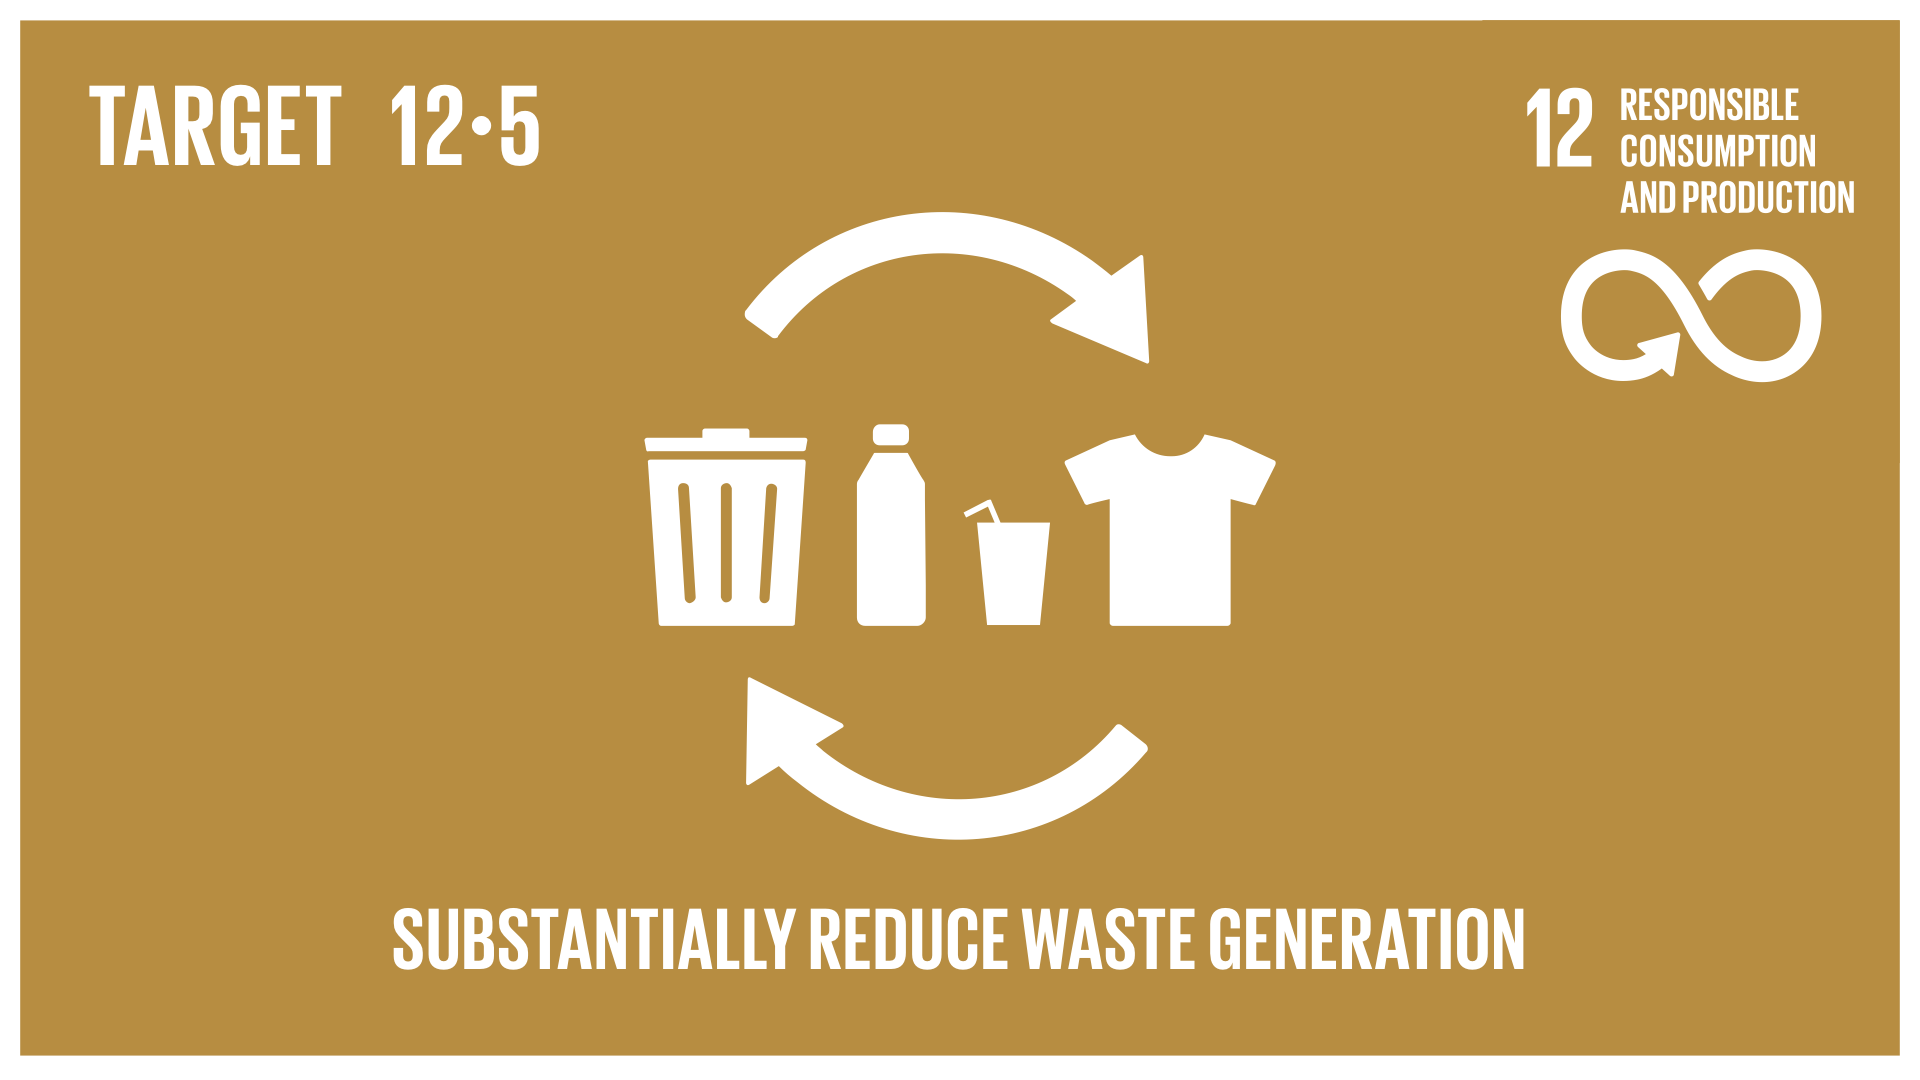 Graphic displaying the substantial reduction of waste generation